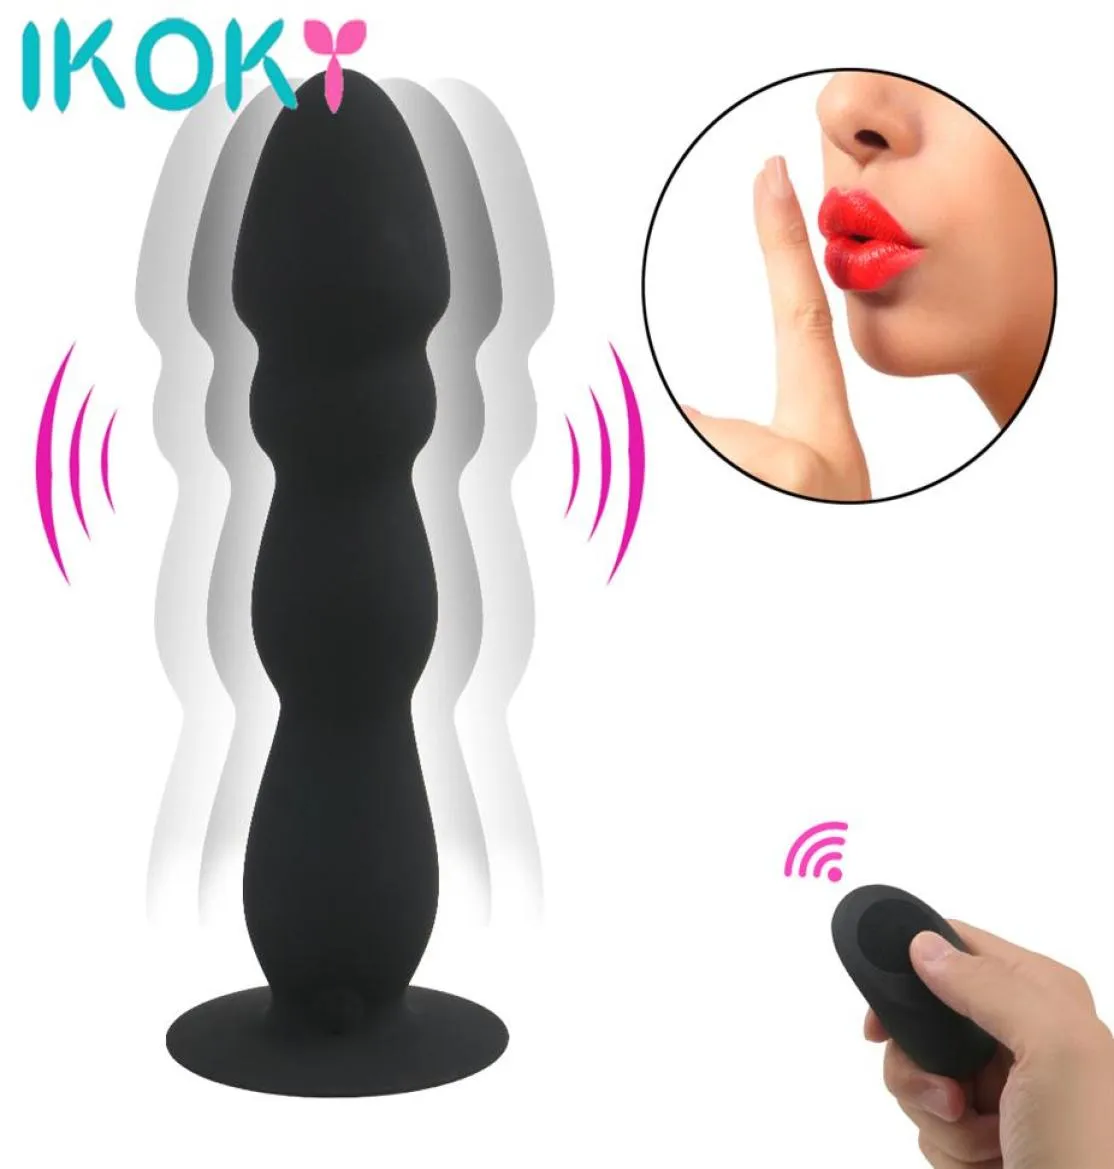 Remote Control Anal Plug Bead Dildo Vibrator Suction Cup Butt Plug Male prostate Massager Vibrator Waterproof Sex Toys248Q3145407